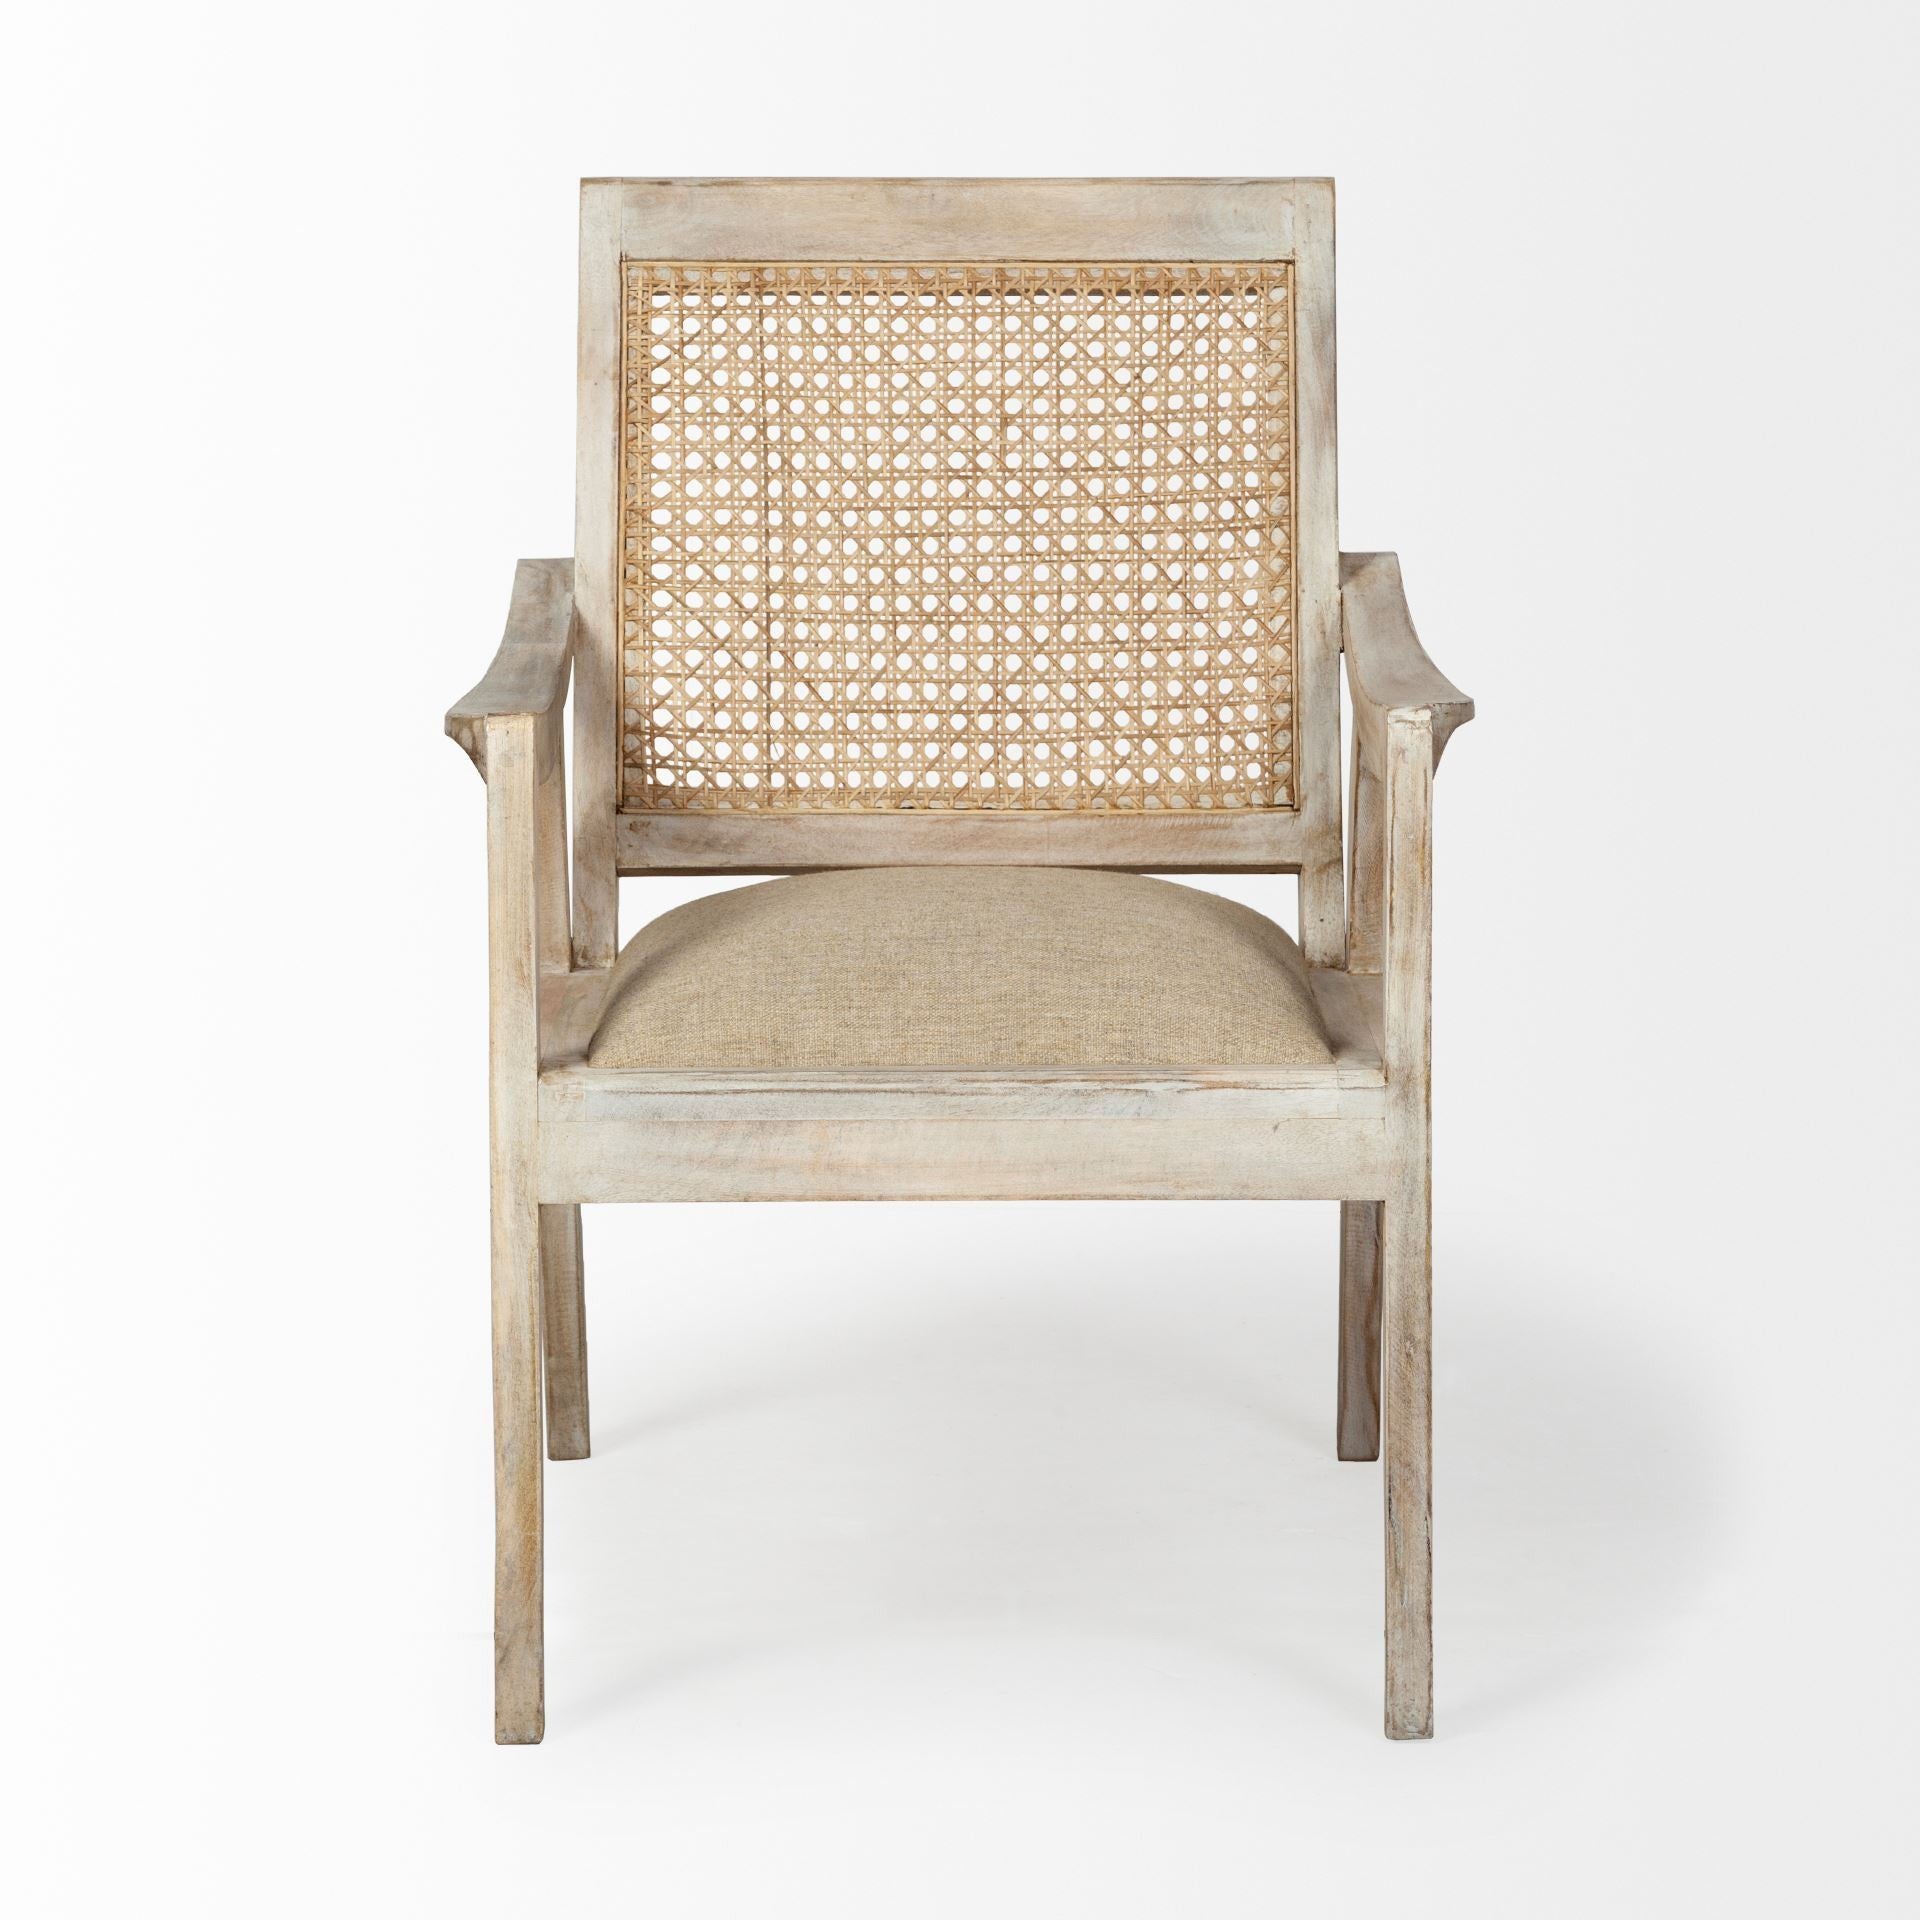 Wooden Chair With Cane Mesh Backrest